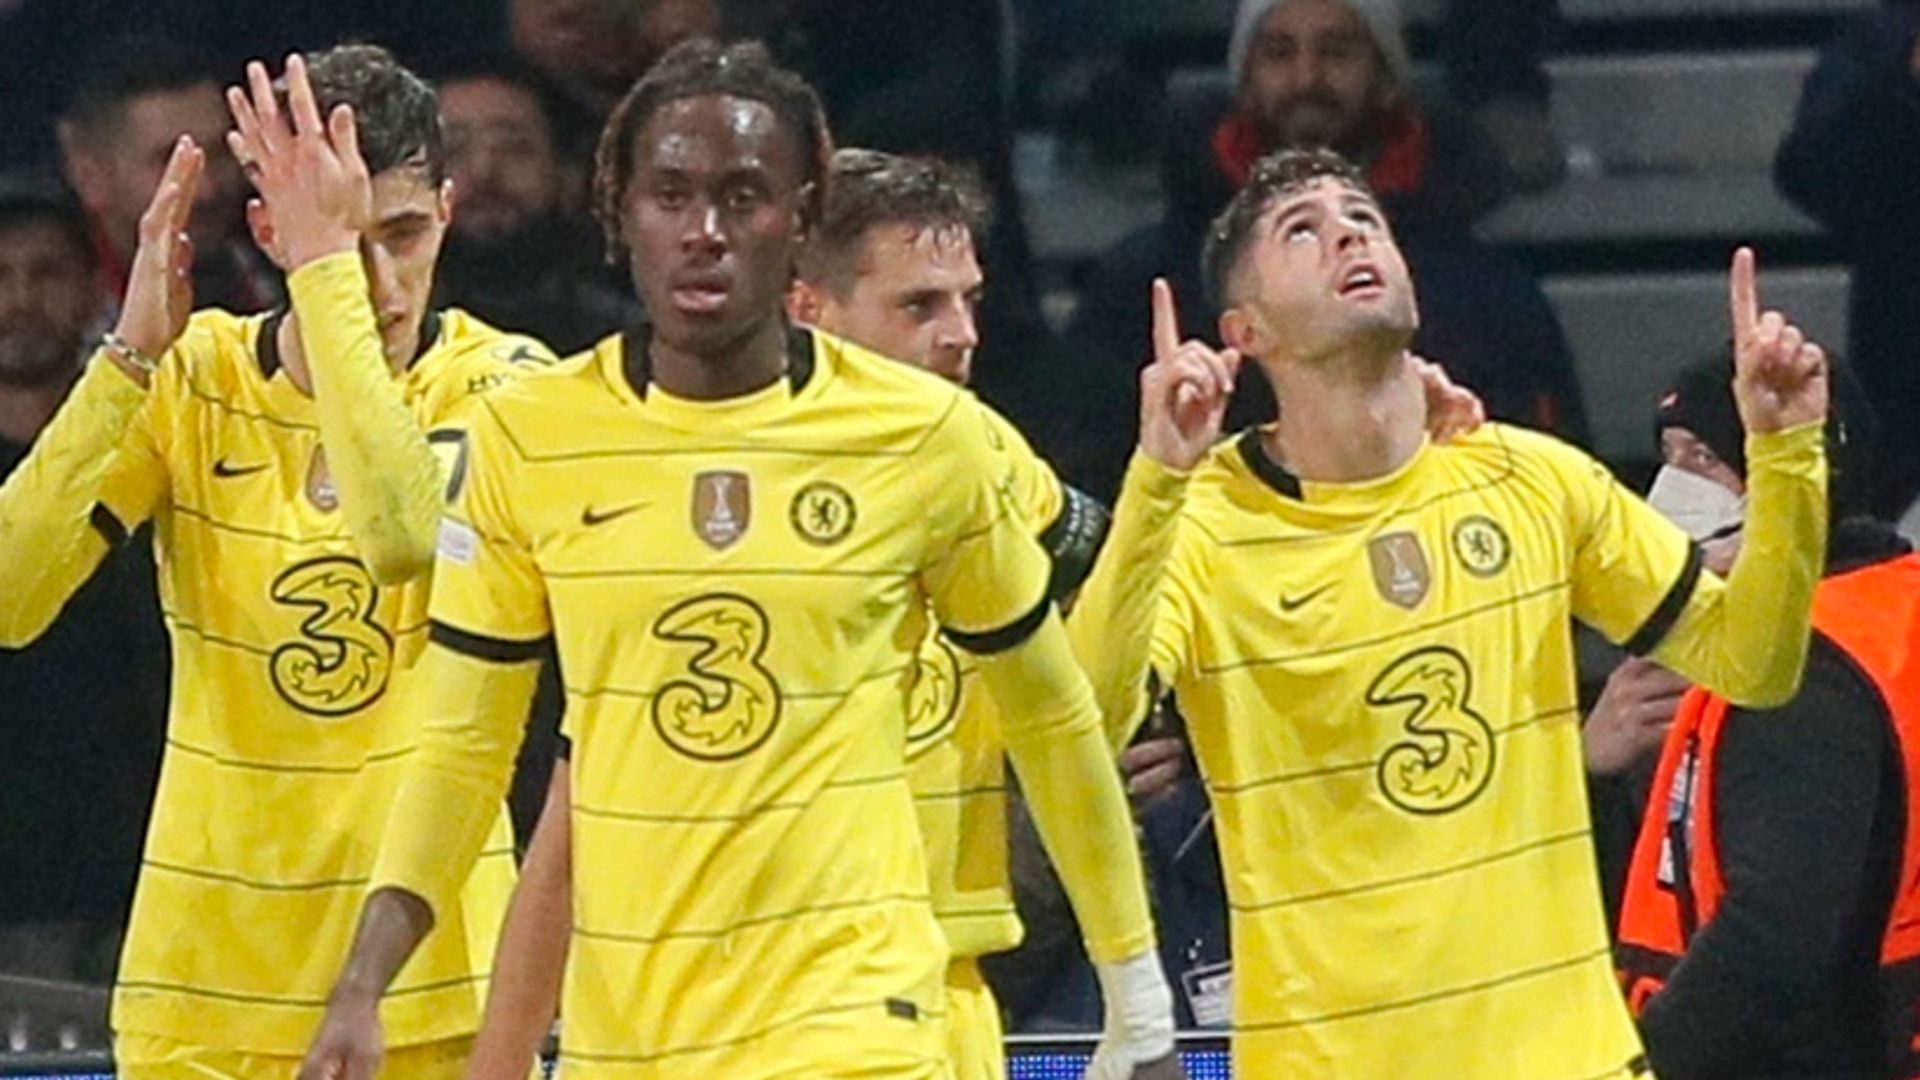 Lille 1-2 Chelsea (Agg: 1-4): Christian Pulisic and Cesar Azpilicueta send Blues into Champions League quarter-finals